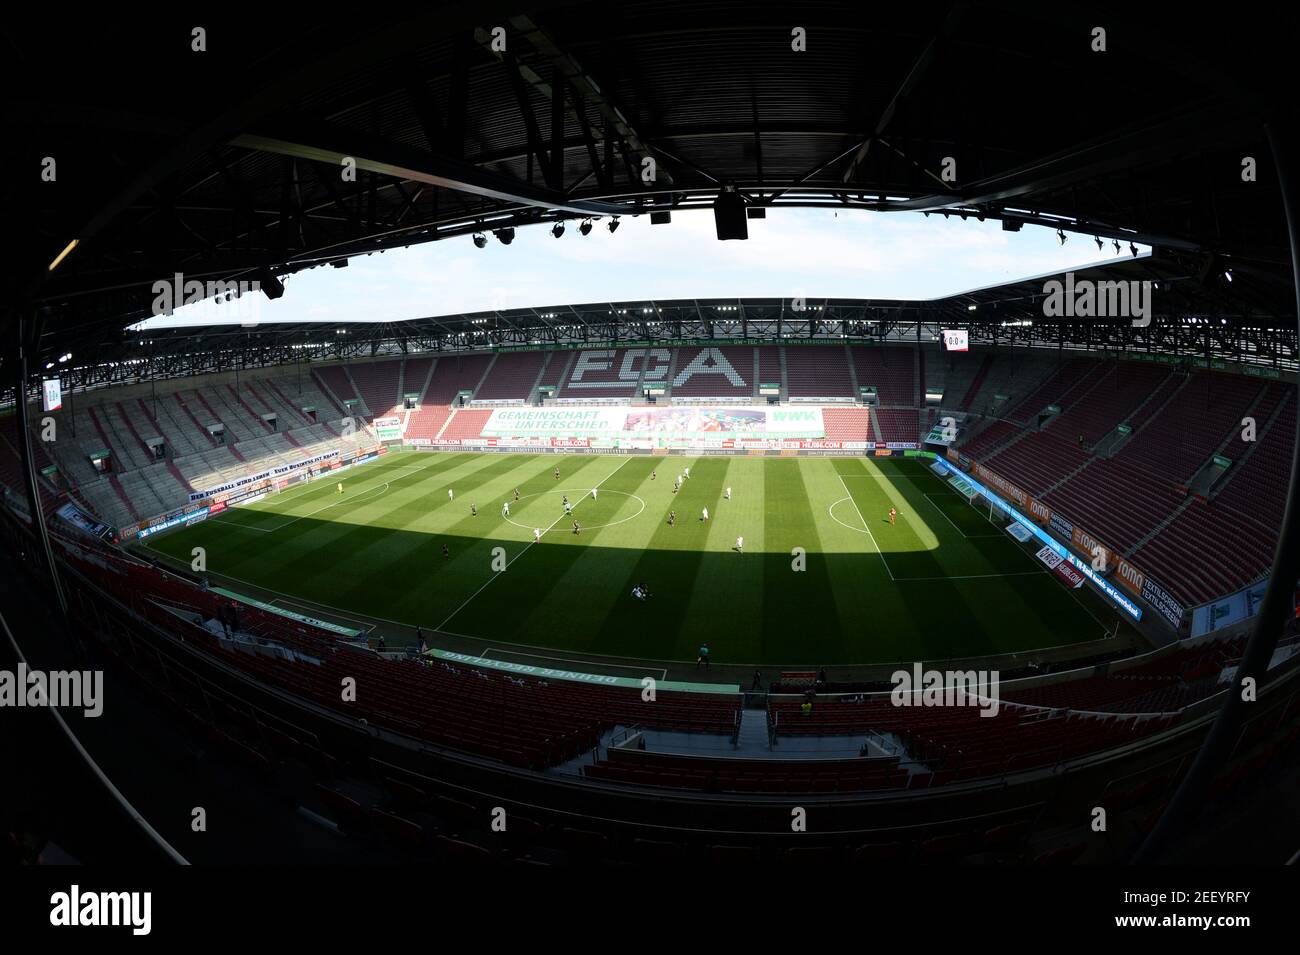 Soccer Football - Bundesliga - FC Augsburg v VfL Wolfsburg - WWK Arena, Augsburg, Germany - May 16, 2020 General view during the match, as play resumes behind closed doors following the outbreak of the coronavirus disease (COVID-19) Manuel Schwarz/Pool via REUTERS  DFL regulations prohibit any use of photographs as image sequences and/or quasi-video Stock Photo